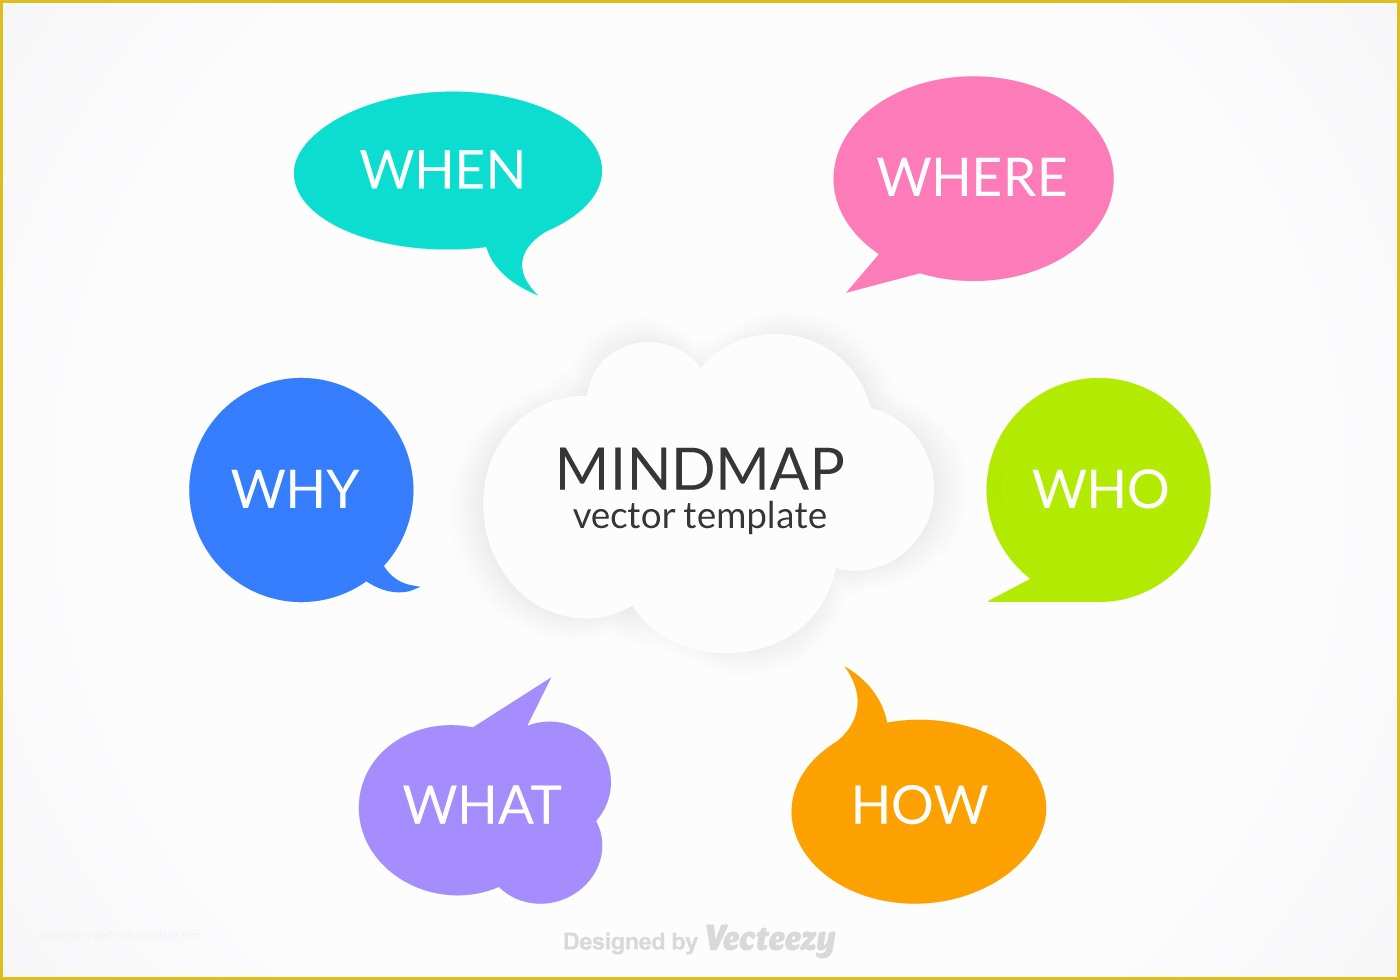 Free Mind Map Template Of Free Mindmap Vector Template Download Free Vector Art